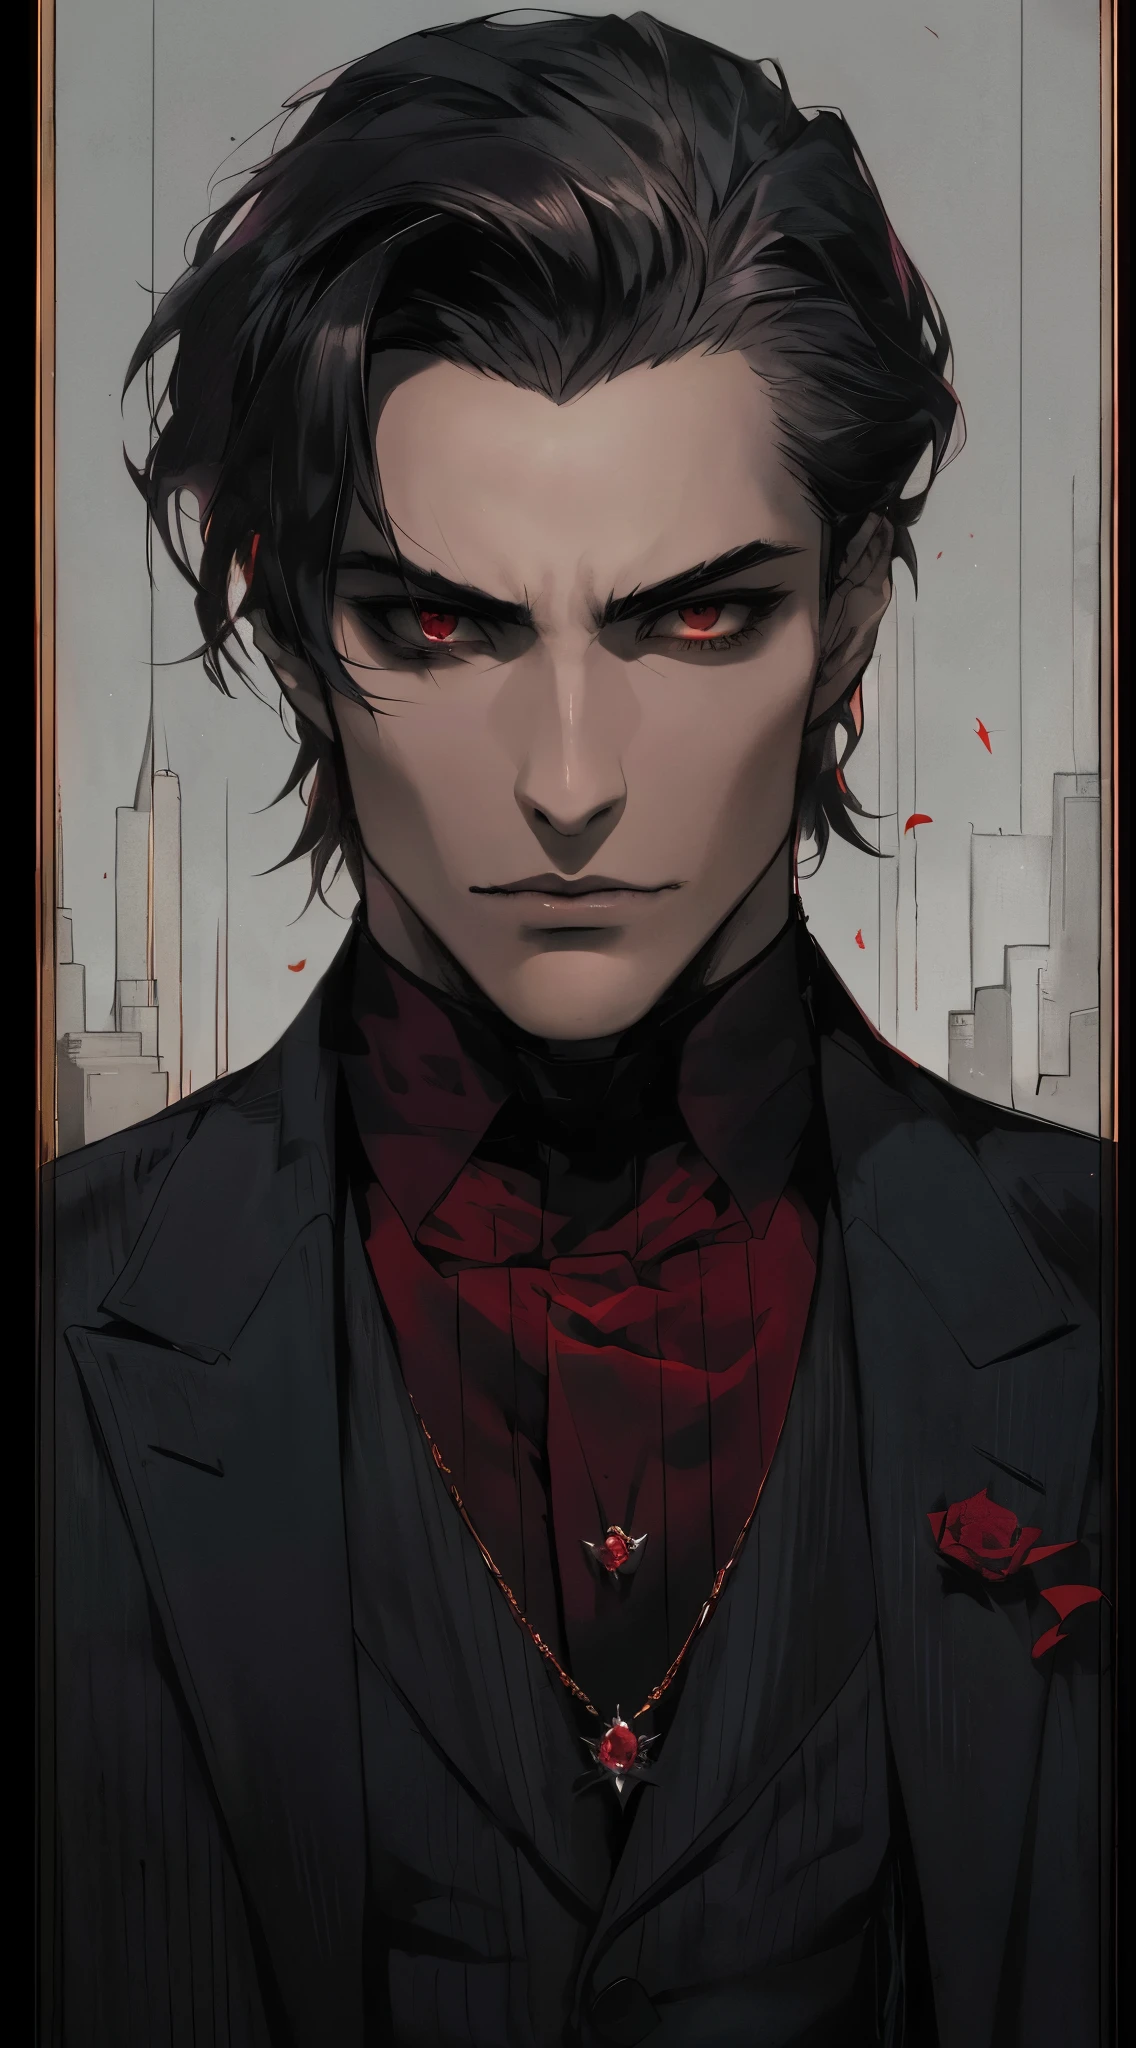 arafed image of a man with a dark suit and red tie, androgynous vampire, handsome male vampire, beautiful androgynous prince, handsome guy in demon slayer art, male vampire, delicate androgynous prince, alucard, anime portrait of a handsome man, vampire portrait, edward, by Yang J, artwork in the style of guweiz